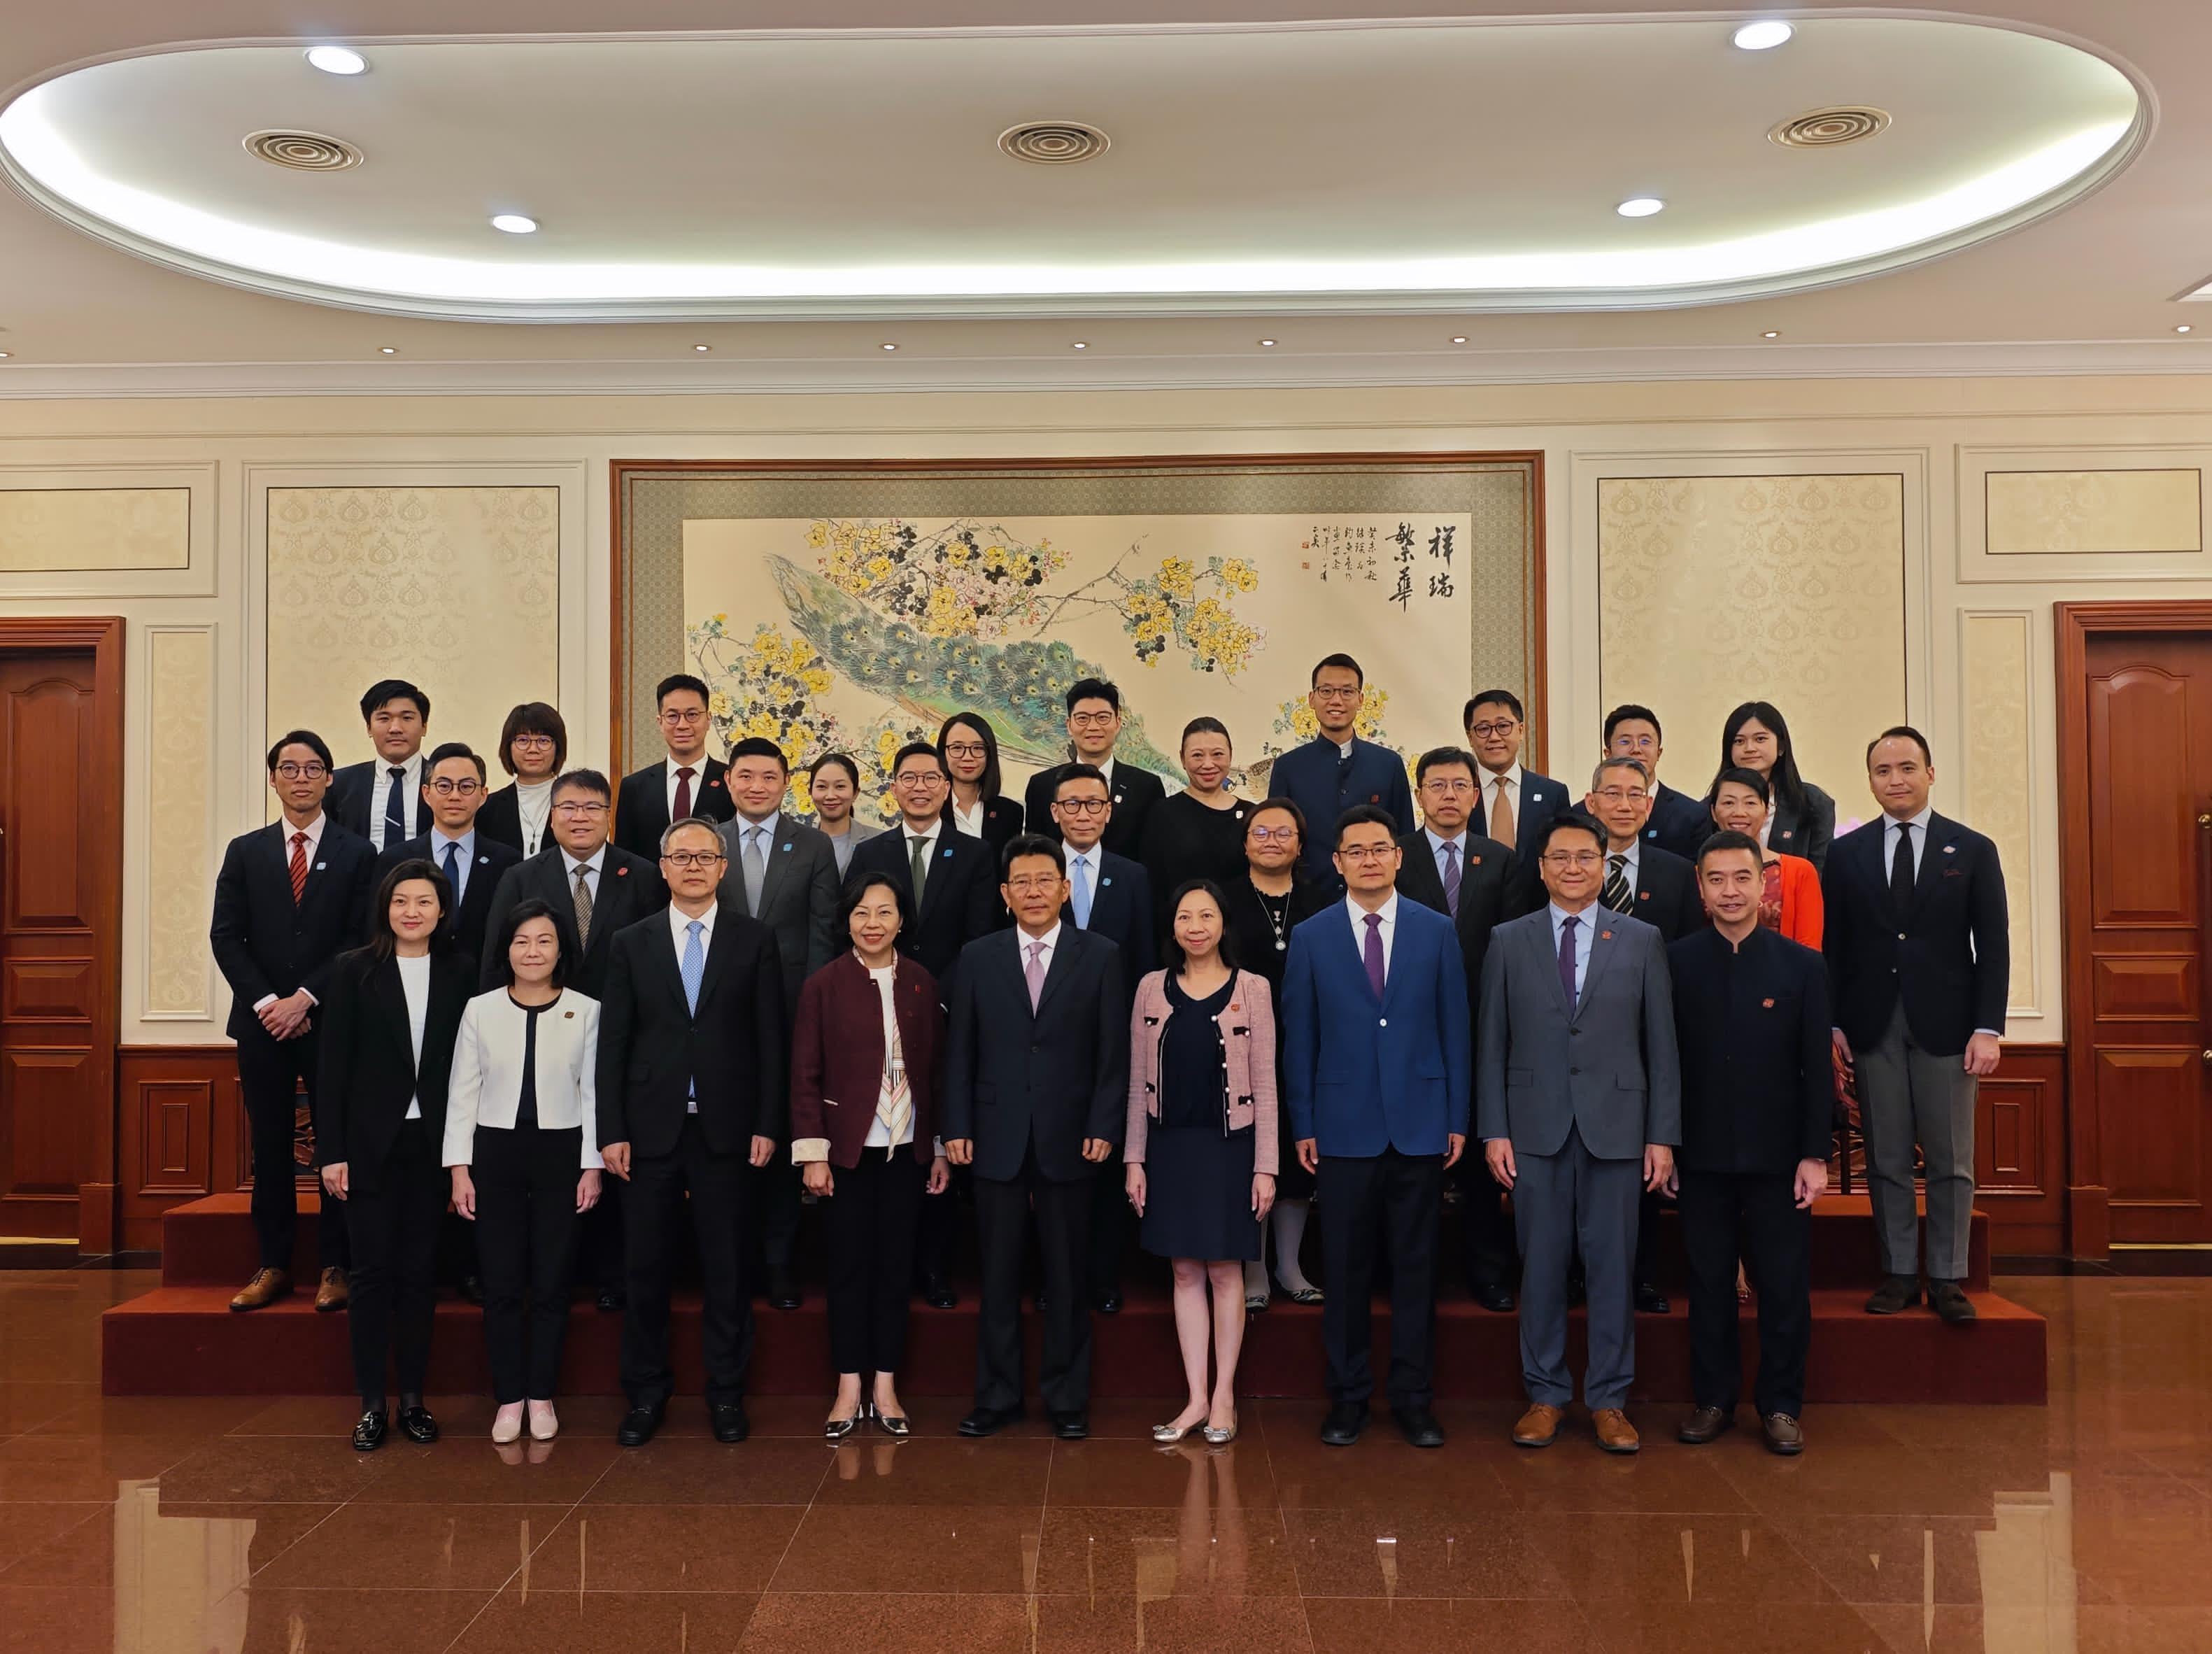 The delegation of the District Officers (DOs) of the Hong Kong Special Administrative Region Government led by the Secretary for Home and Youth Affairs, Miss Alice Mak, continued its study programme in Beijing on district governance today (April 18). Photo shows the Deputy Director of the Hong Kong and Macao Affairs Office of the State Council Mr Wang Linggui (front row, centre); Miss Mak (front row, fourth left); the Permanent Secretary for Home and Youth Affairs, Ms Shirley Lam (front row, fourth right); the Director of Home Affairs, Mrs Alice Cheung (front row, second left) and 18 DOs.